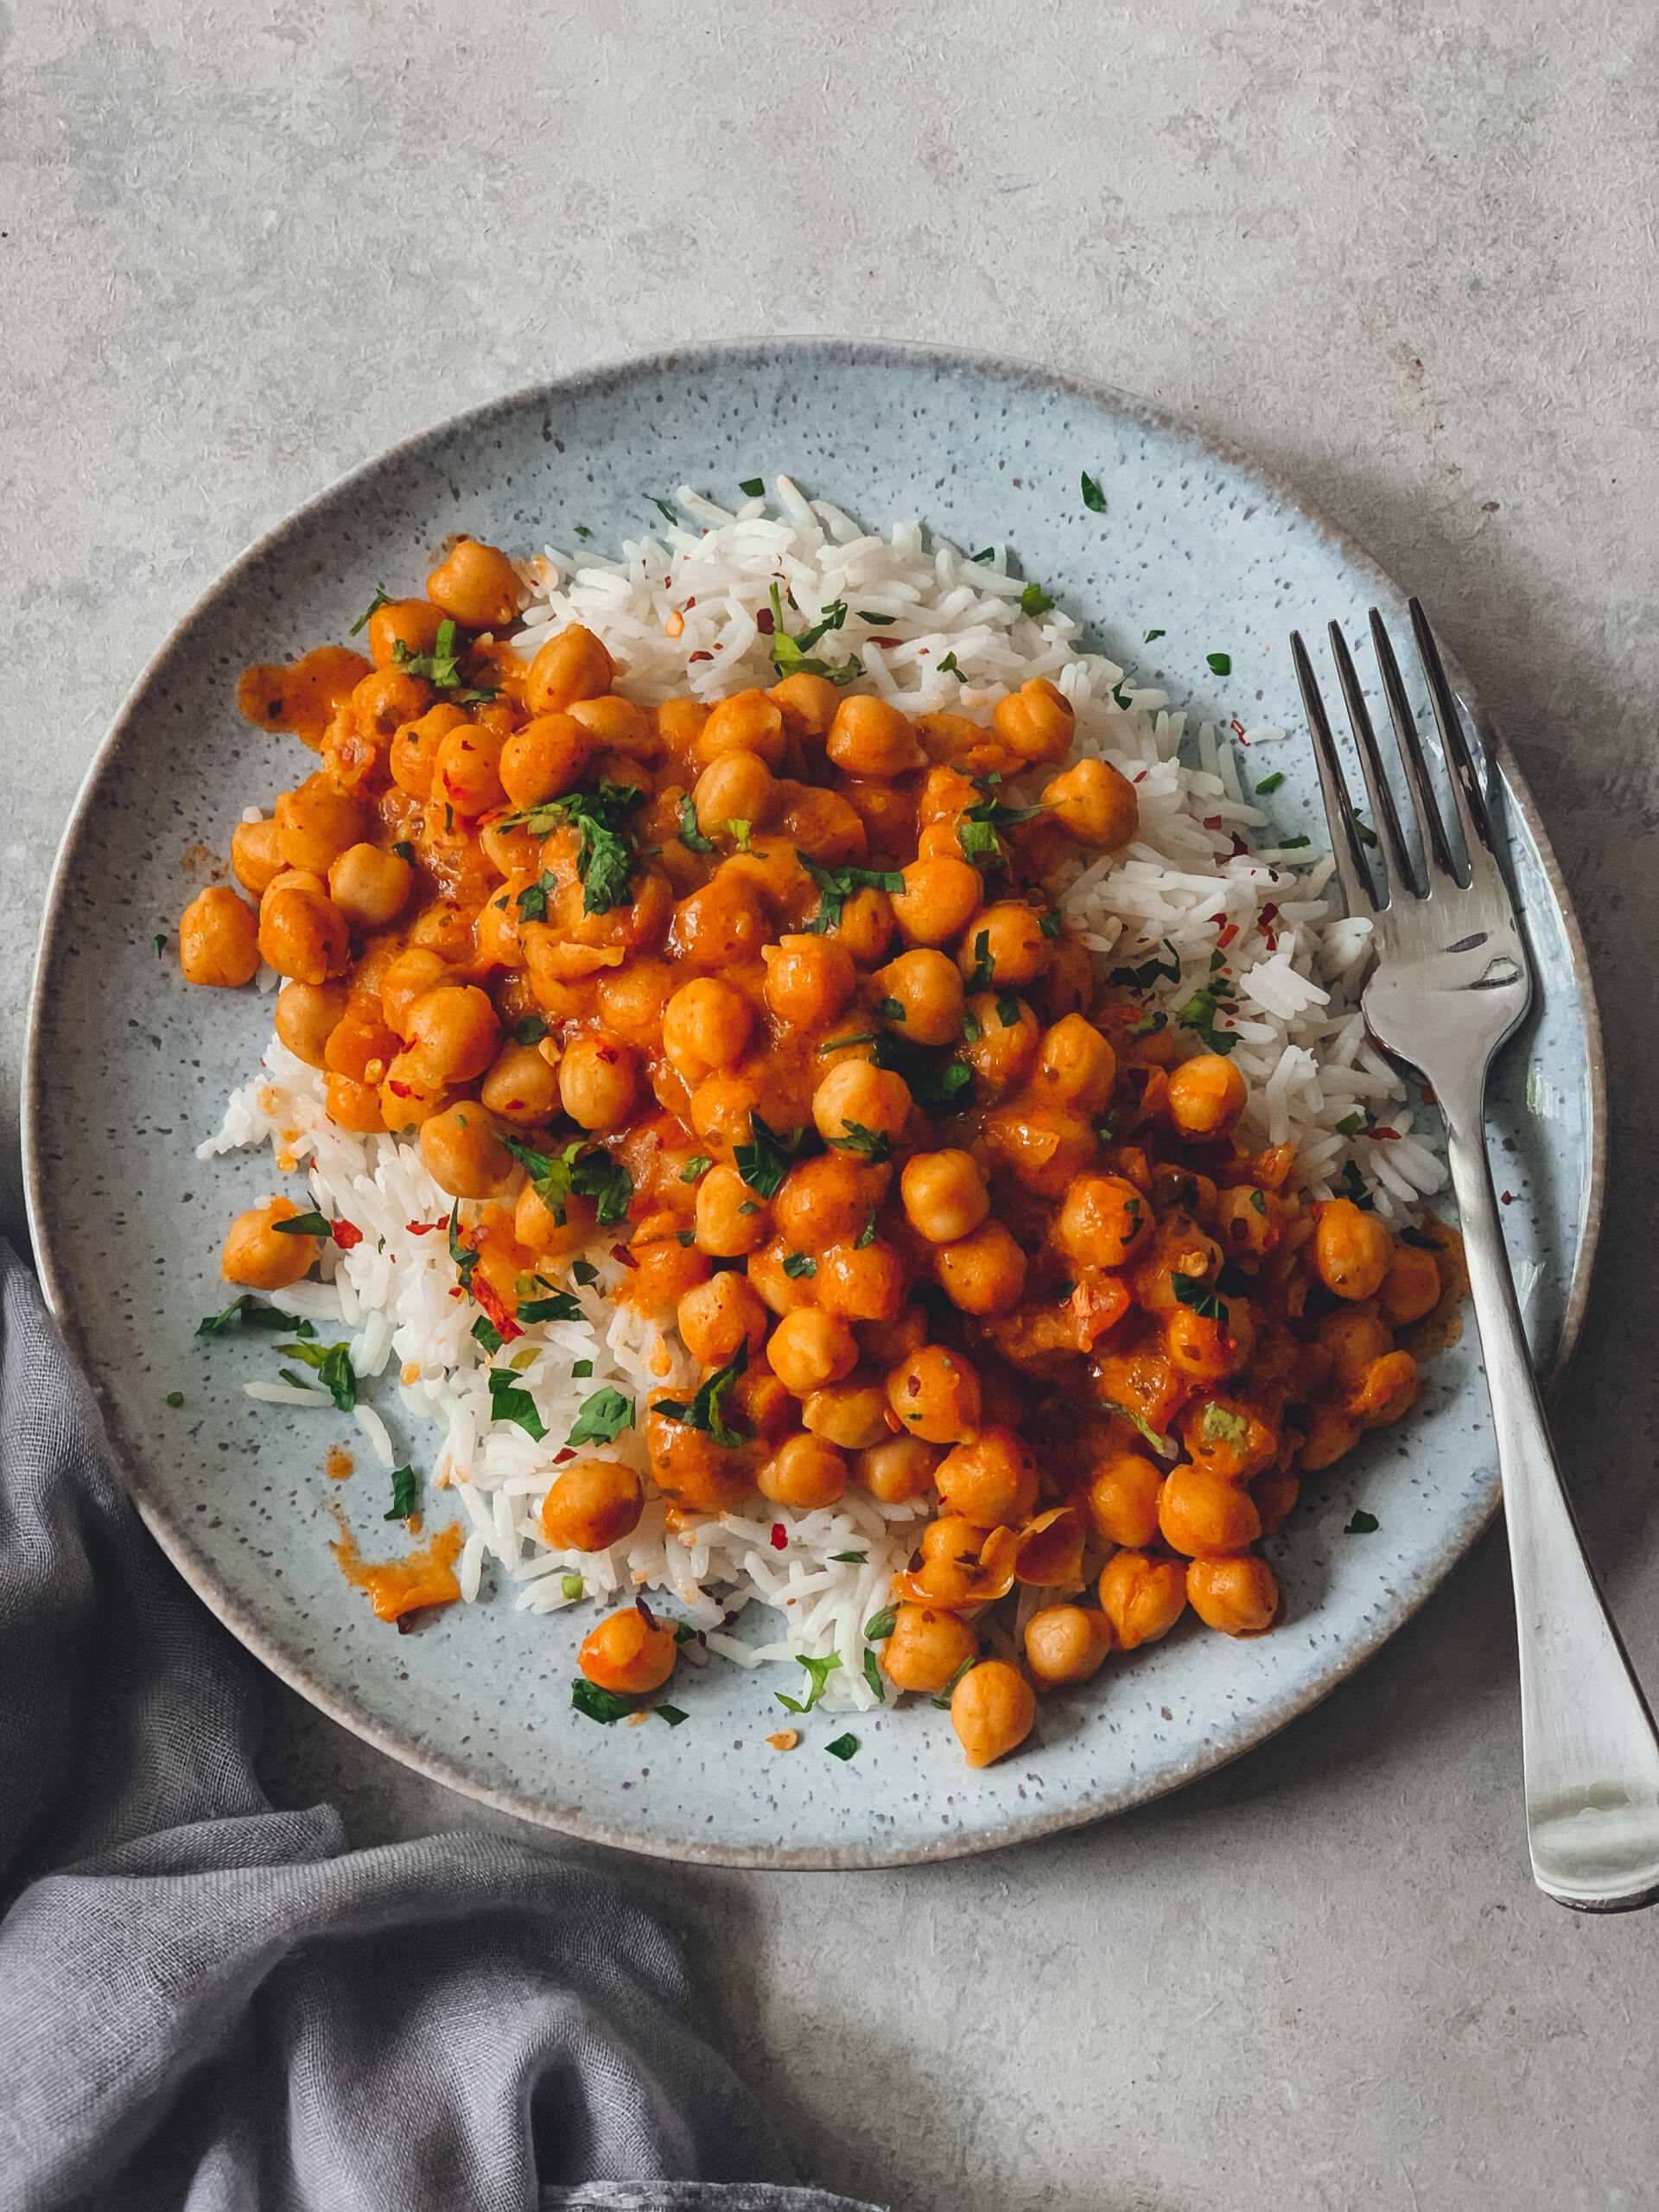 Coconut Chickpea Curry